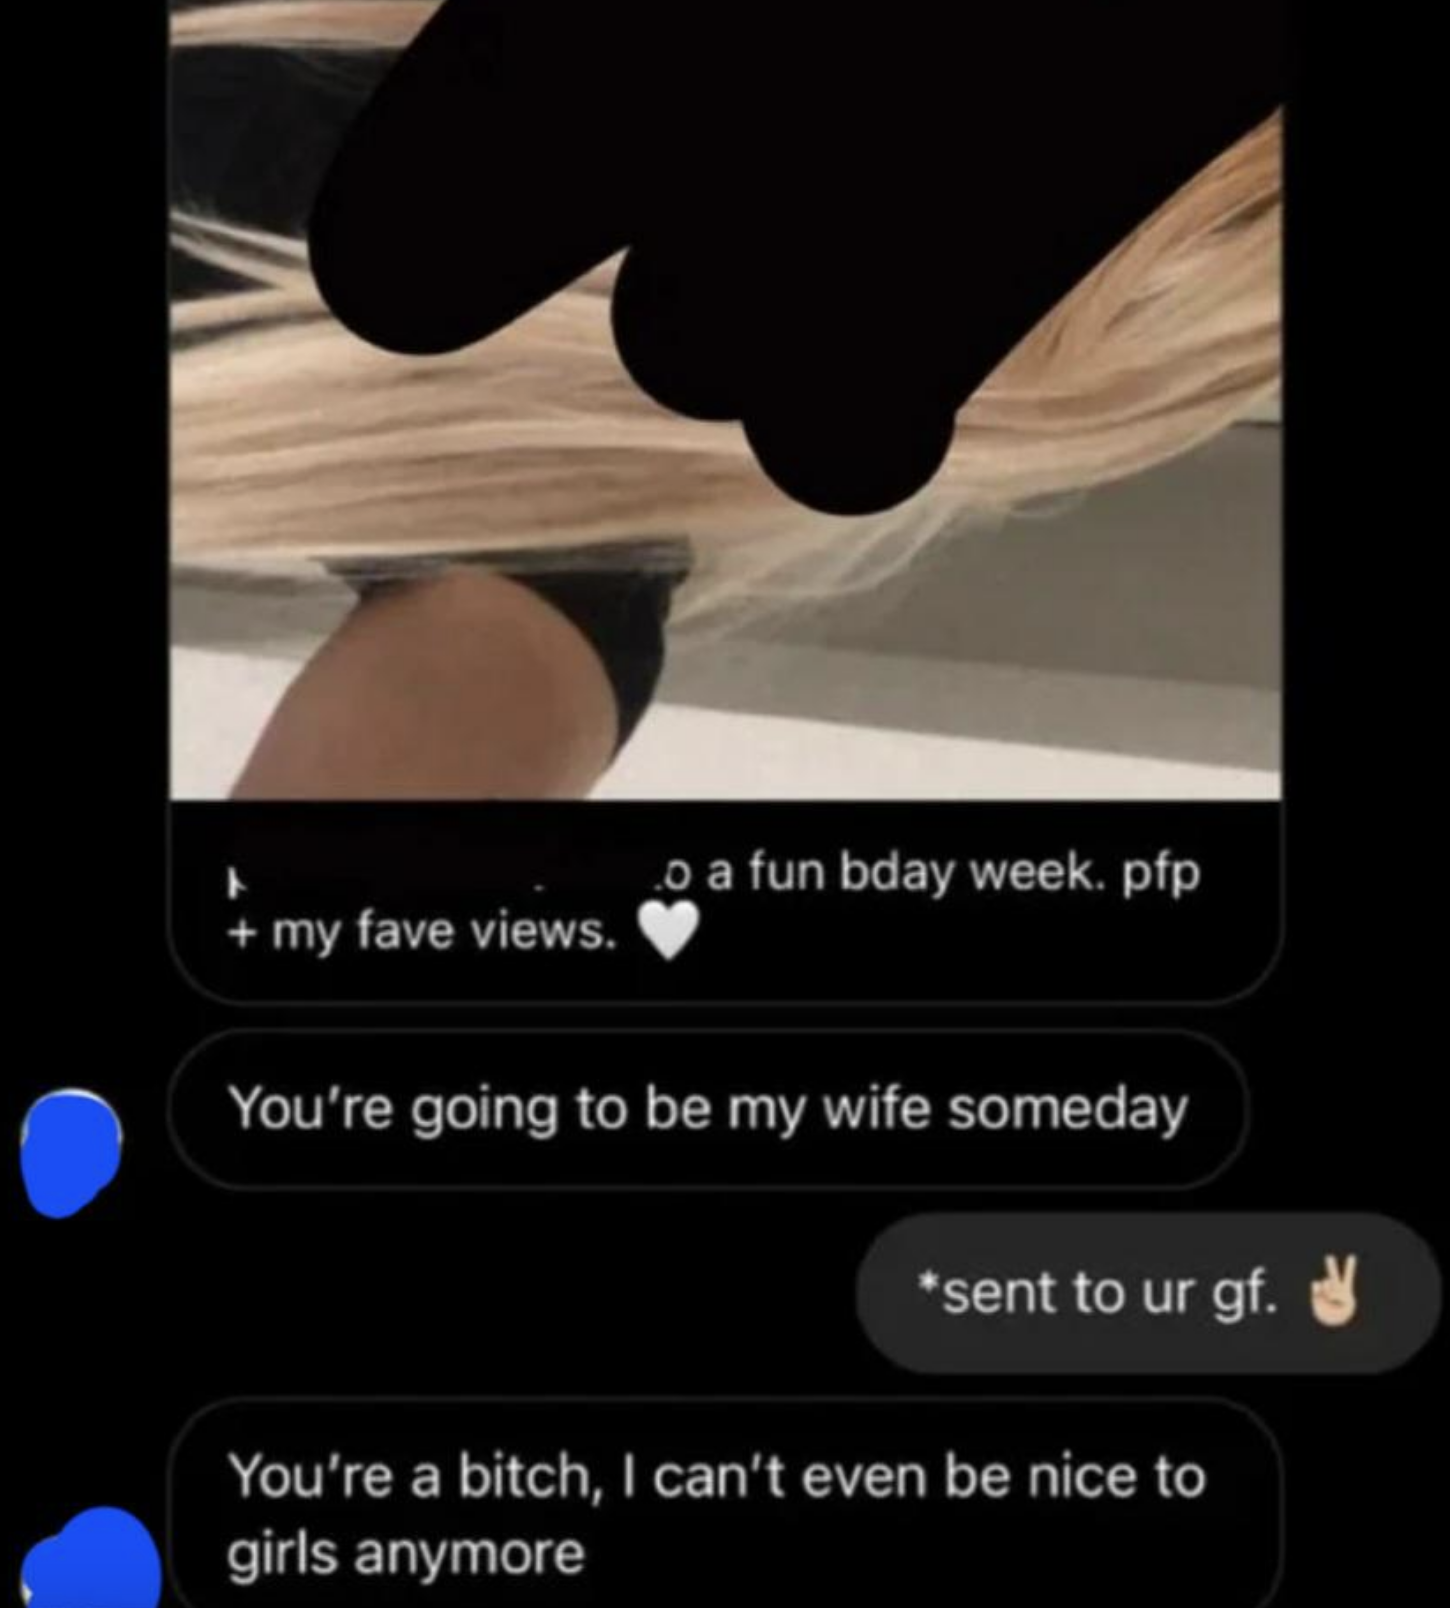 woman saying they were gonna tell his girlfriend so he responds by calling her a bitch